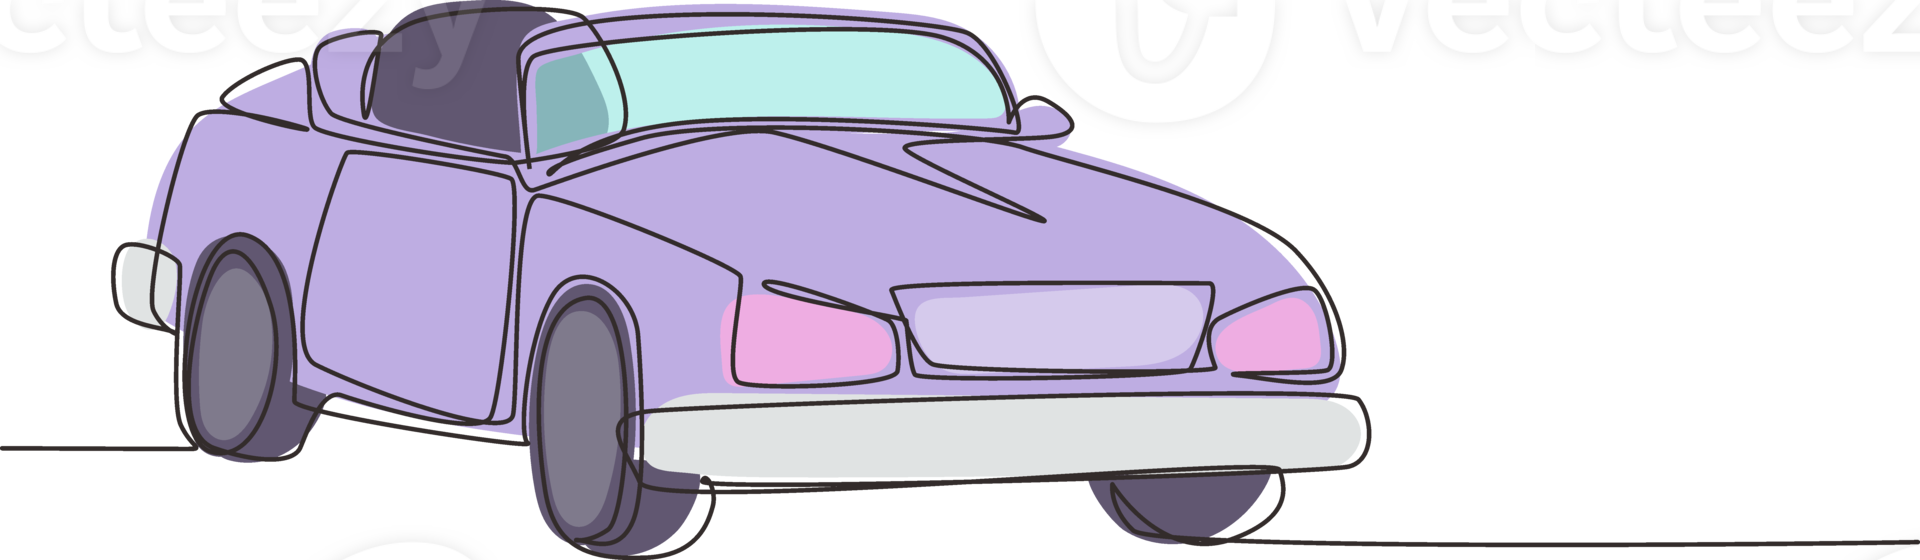 Single continuous line drawing classic retro convertible sports car. Collectors business comfortable cabrio automobile supercar. Vintage motor vehicle concept. One line draw graphic design png